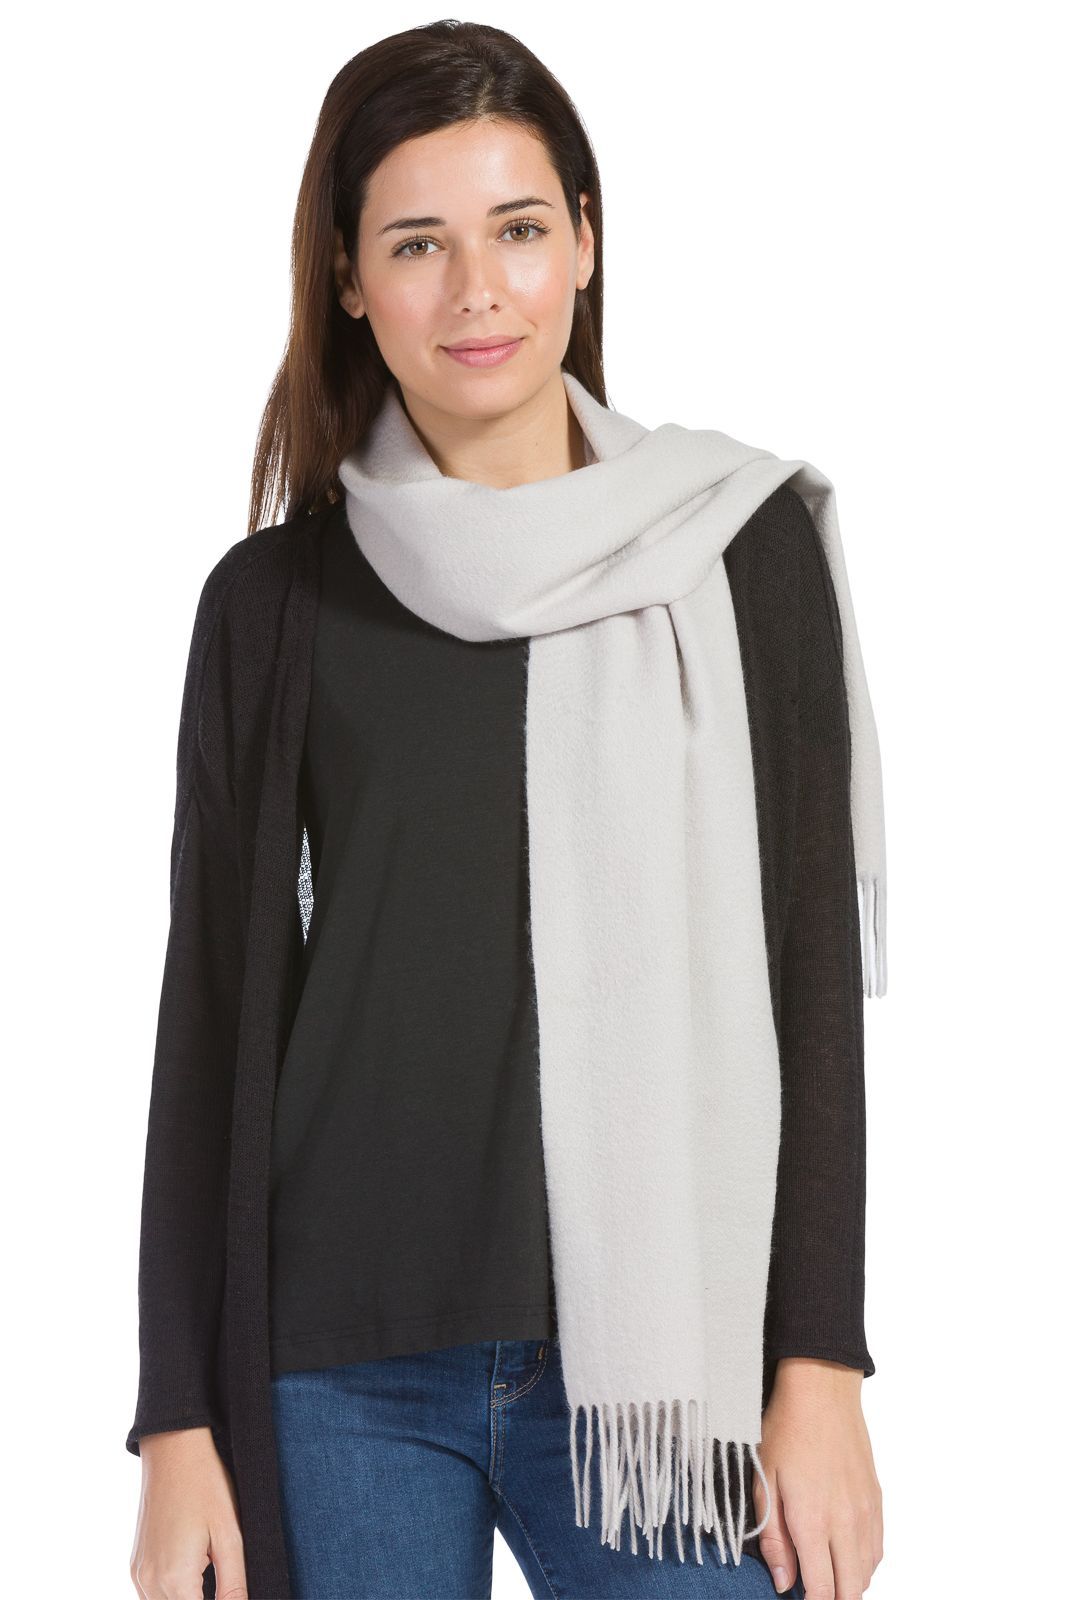 Women's Classic 100% Pure Cashmere Scarf Womens>Accessories>Scarf Fishers Finery Stone One Size 